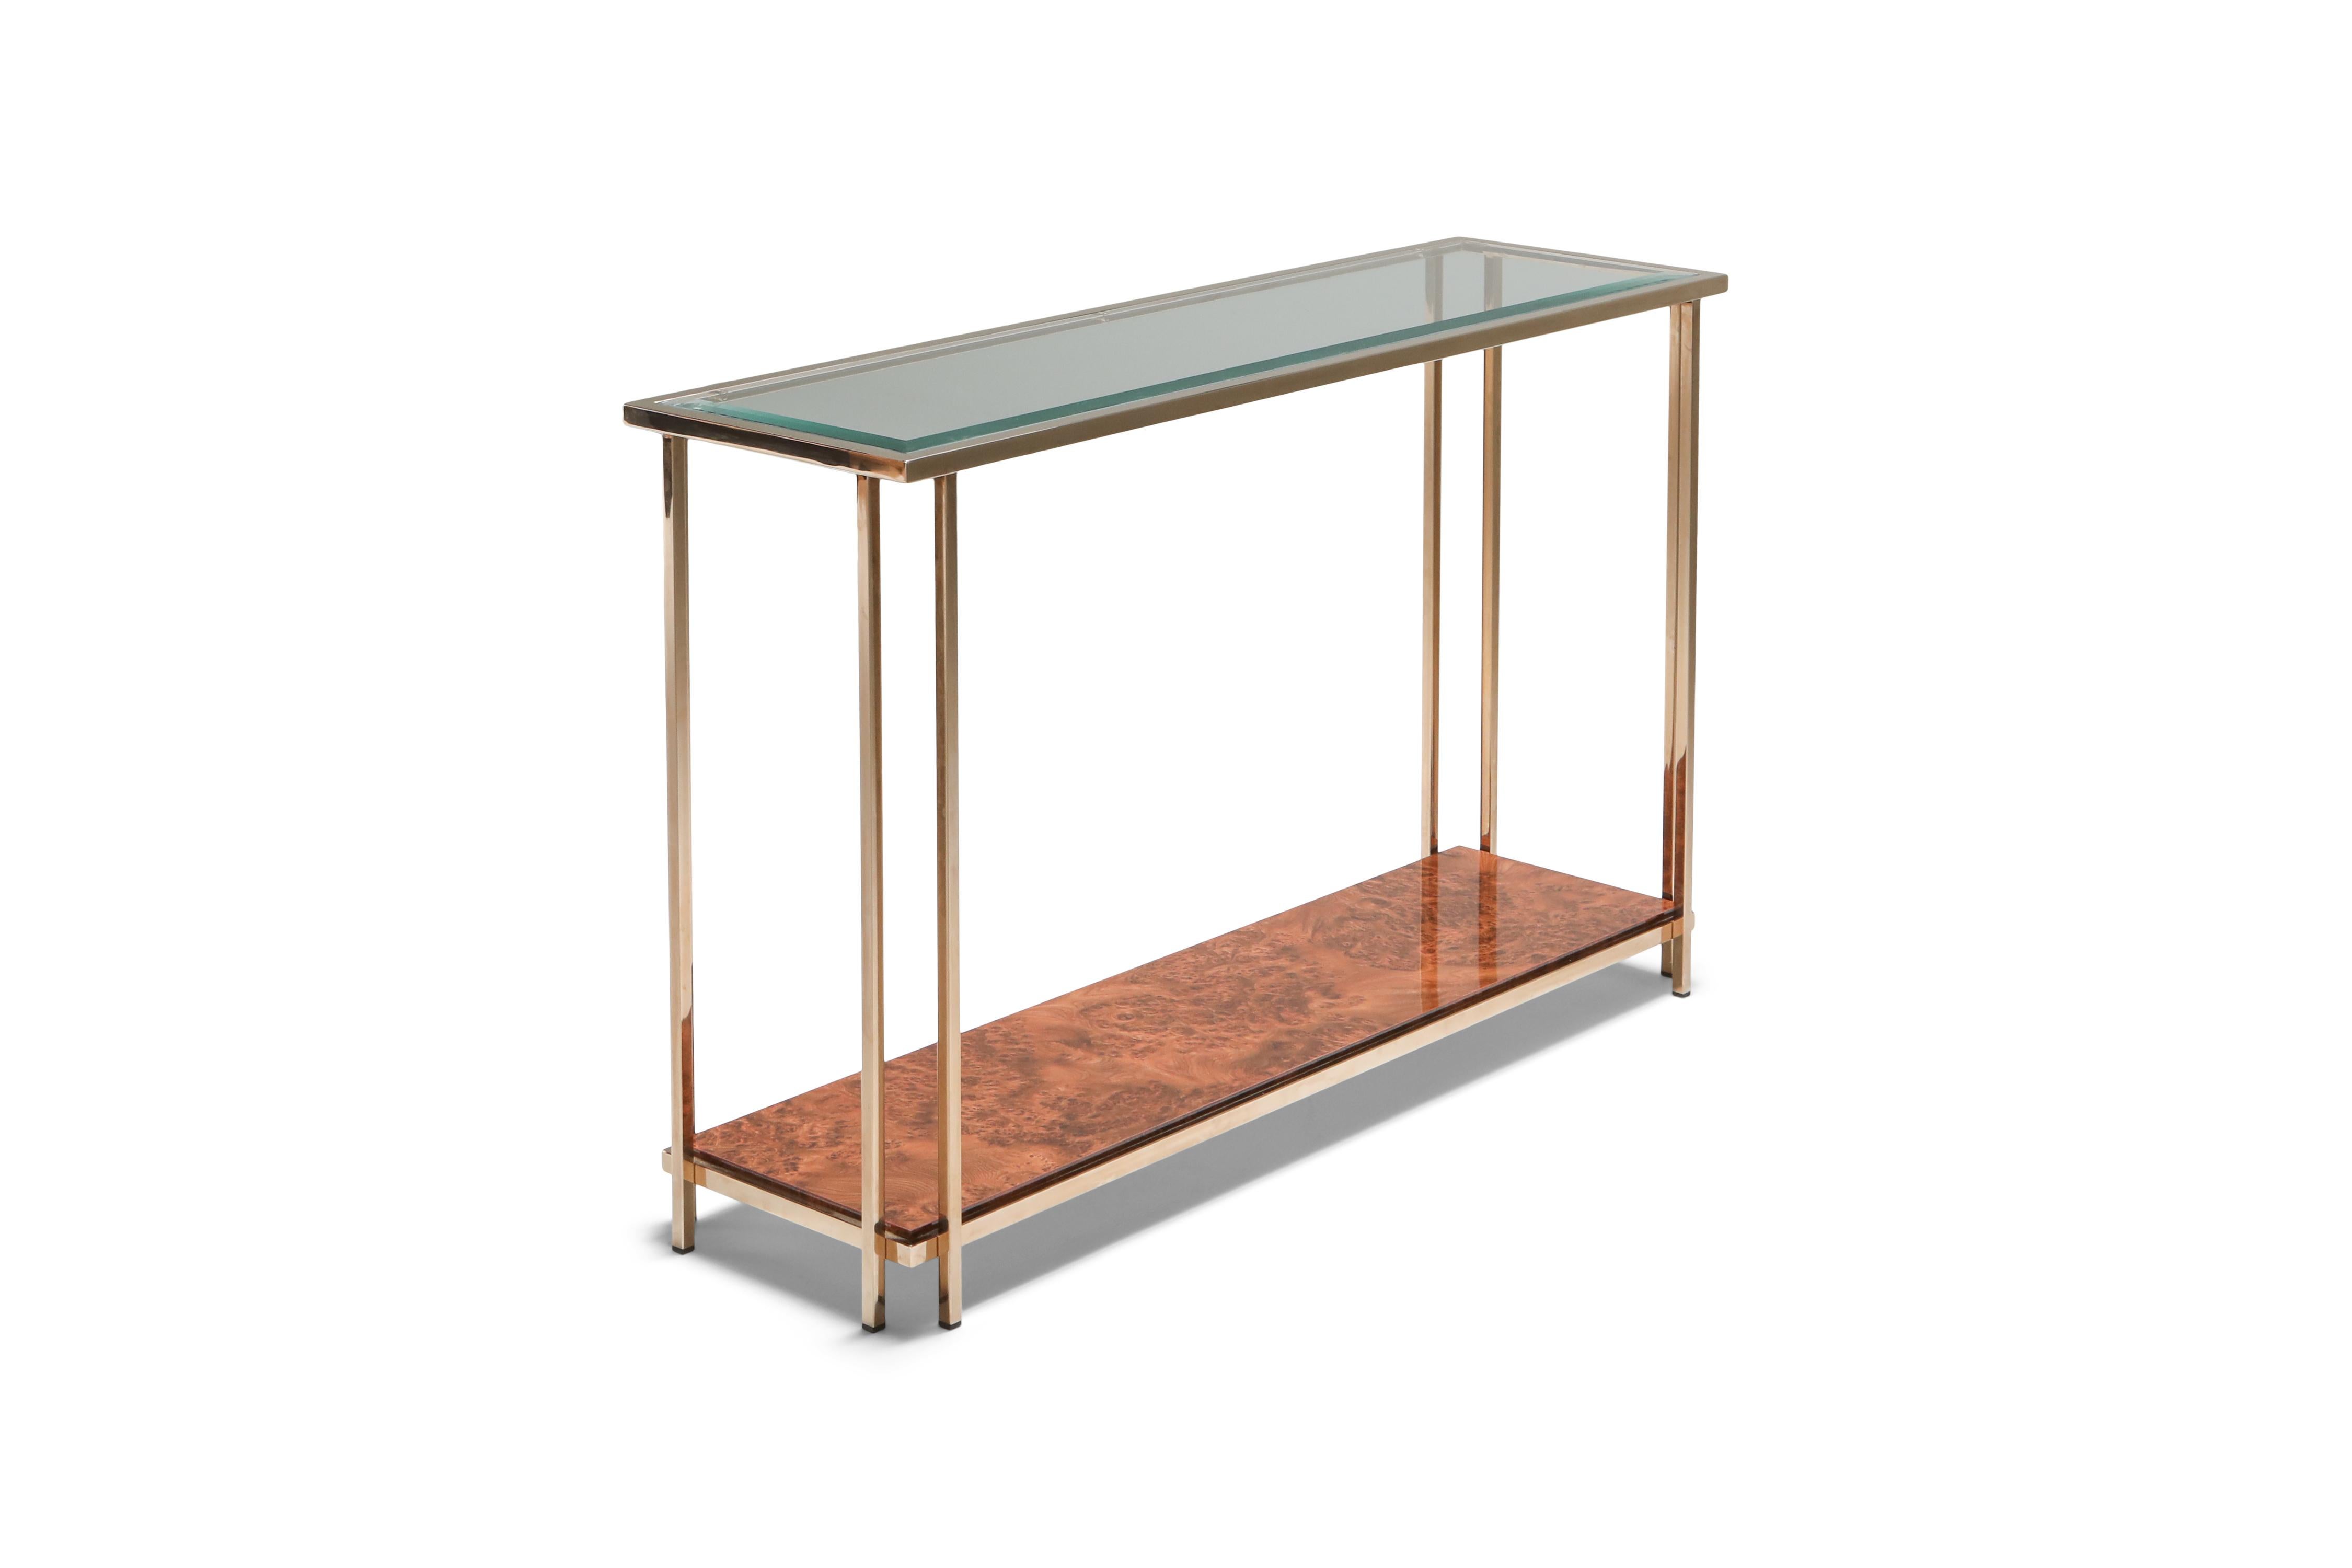 Maison Jansen, France, two-tier console table, 1980s
23-karat gold-plated frame.
Metropolitan chic piece, international style
Burl bottom, clear glass top.
Would fit well in an eclectic decor inspired by Hollywood regency.
    
  